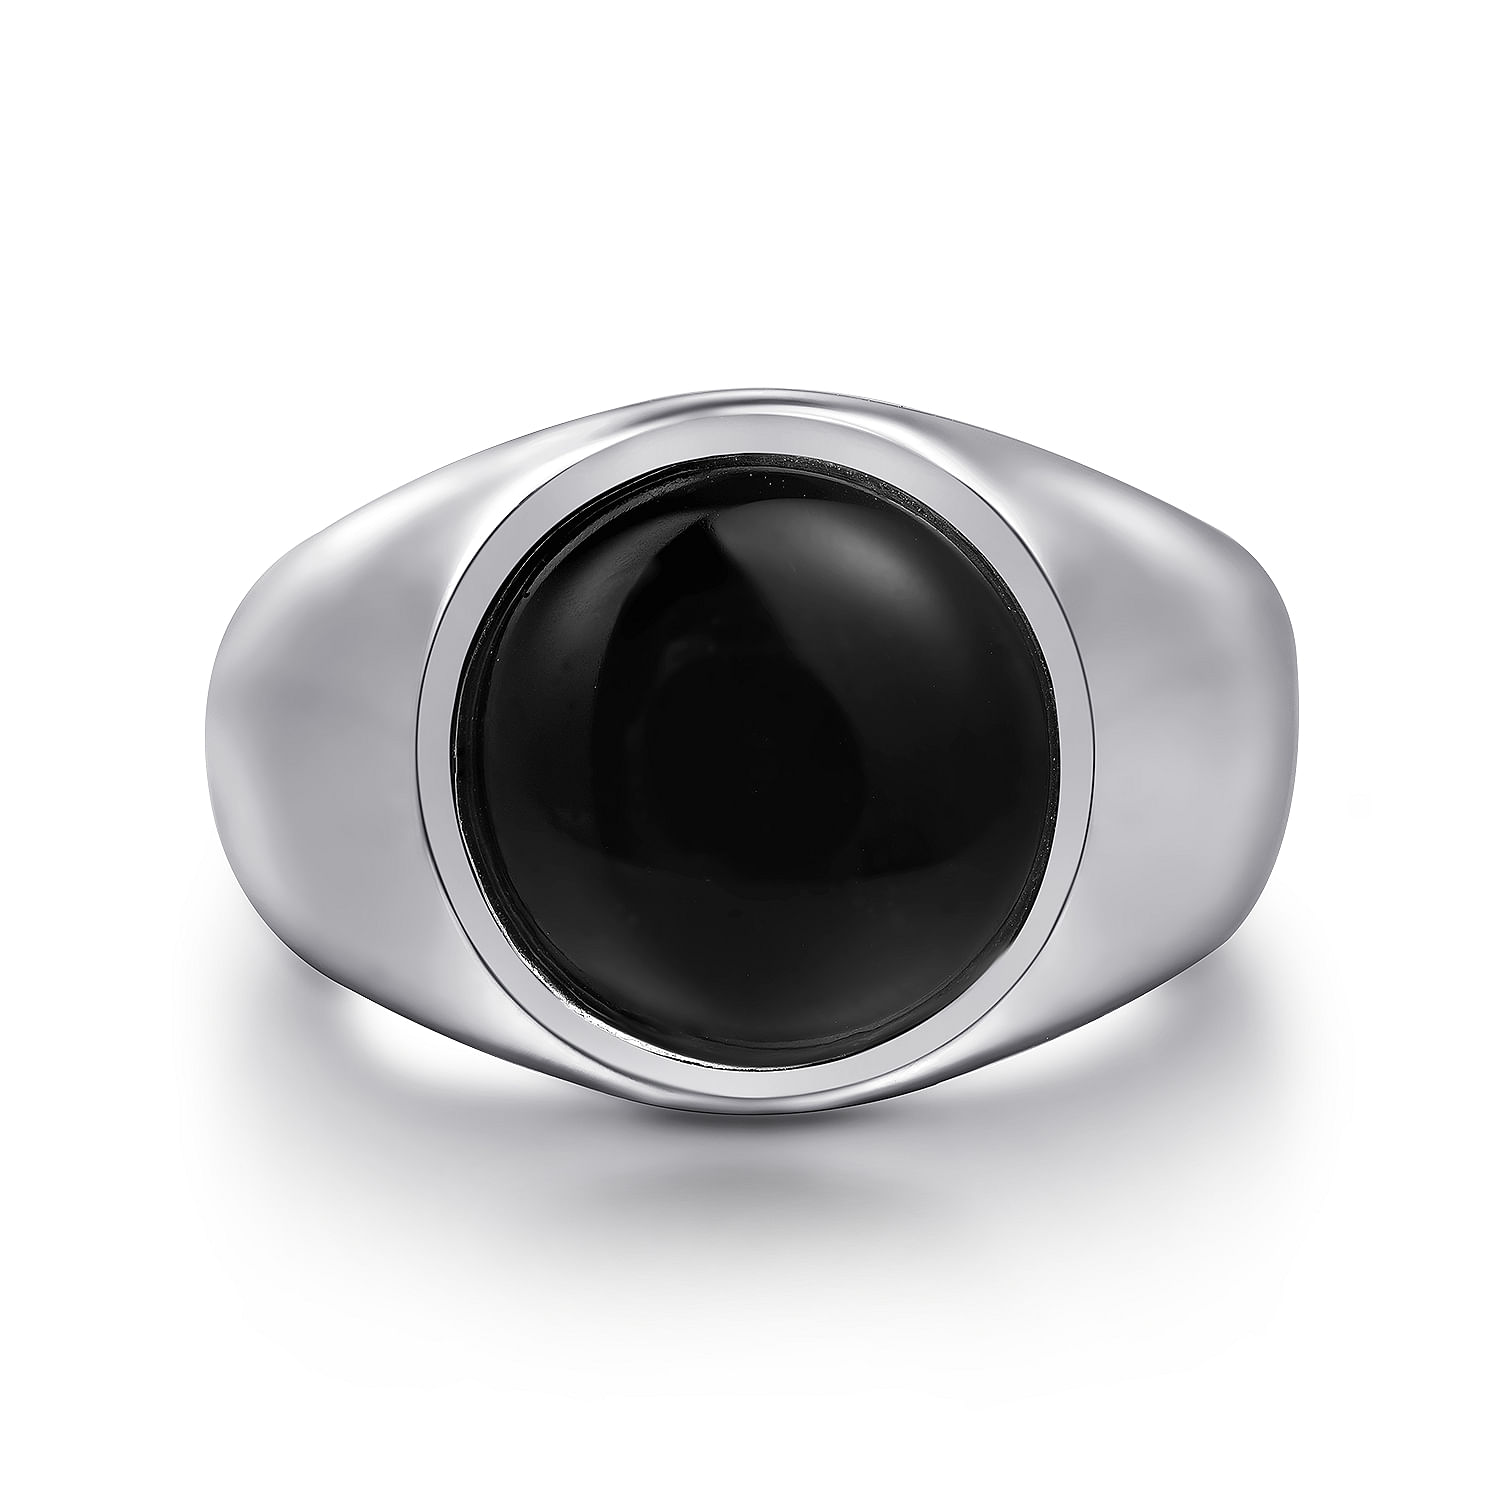 Wide 925 Sterling Silver Signet Ring with Onyx Stone in Sand Blast Finish